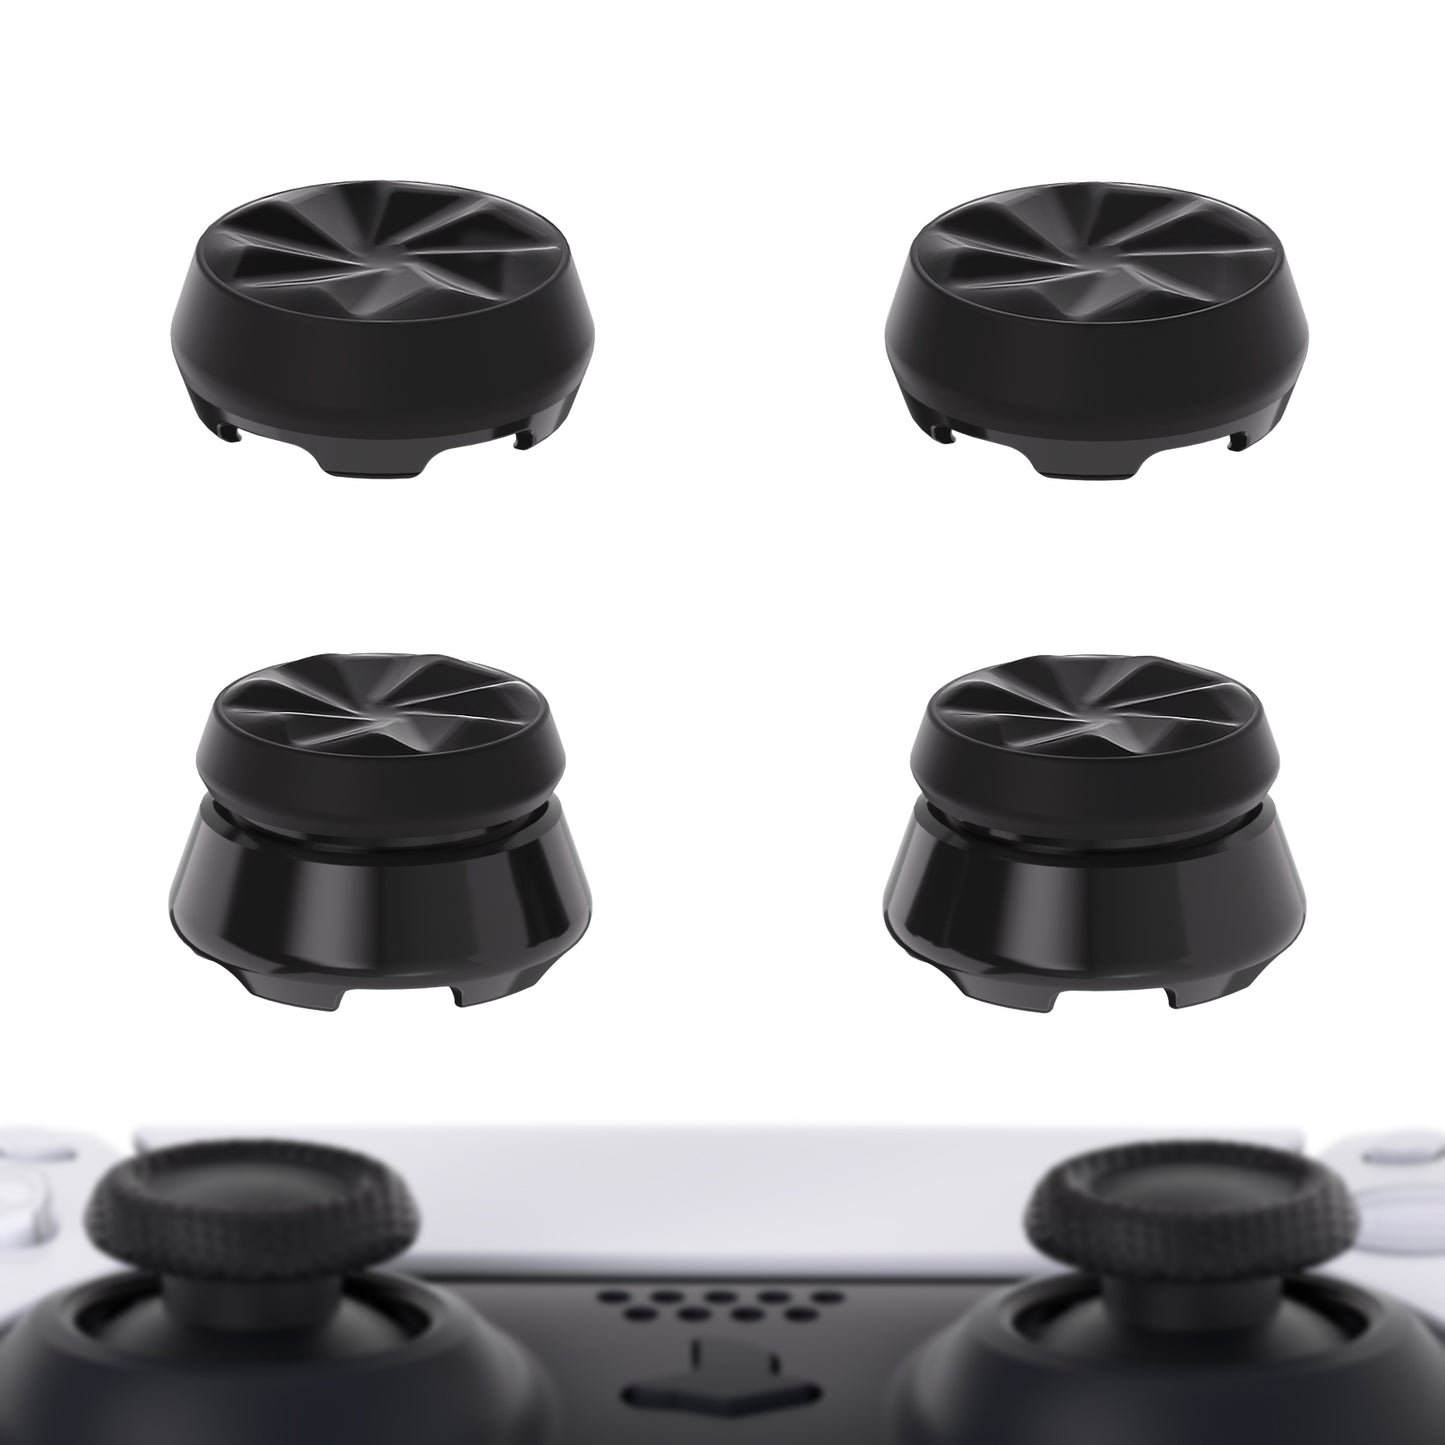 Popvcly Knuckle Straps with Thumbstick Covers & Wrist Straps for